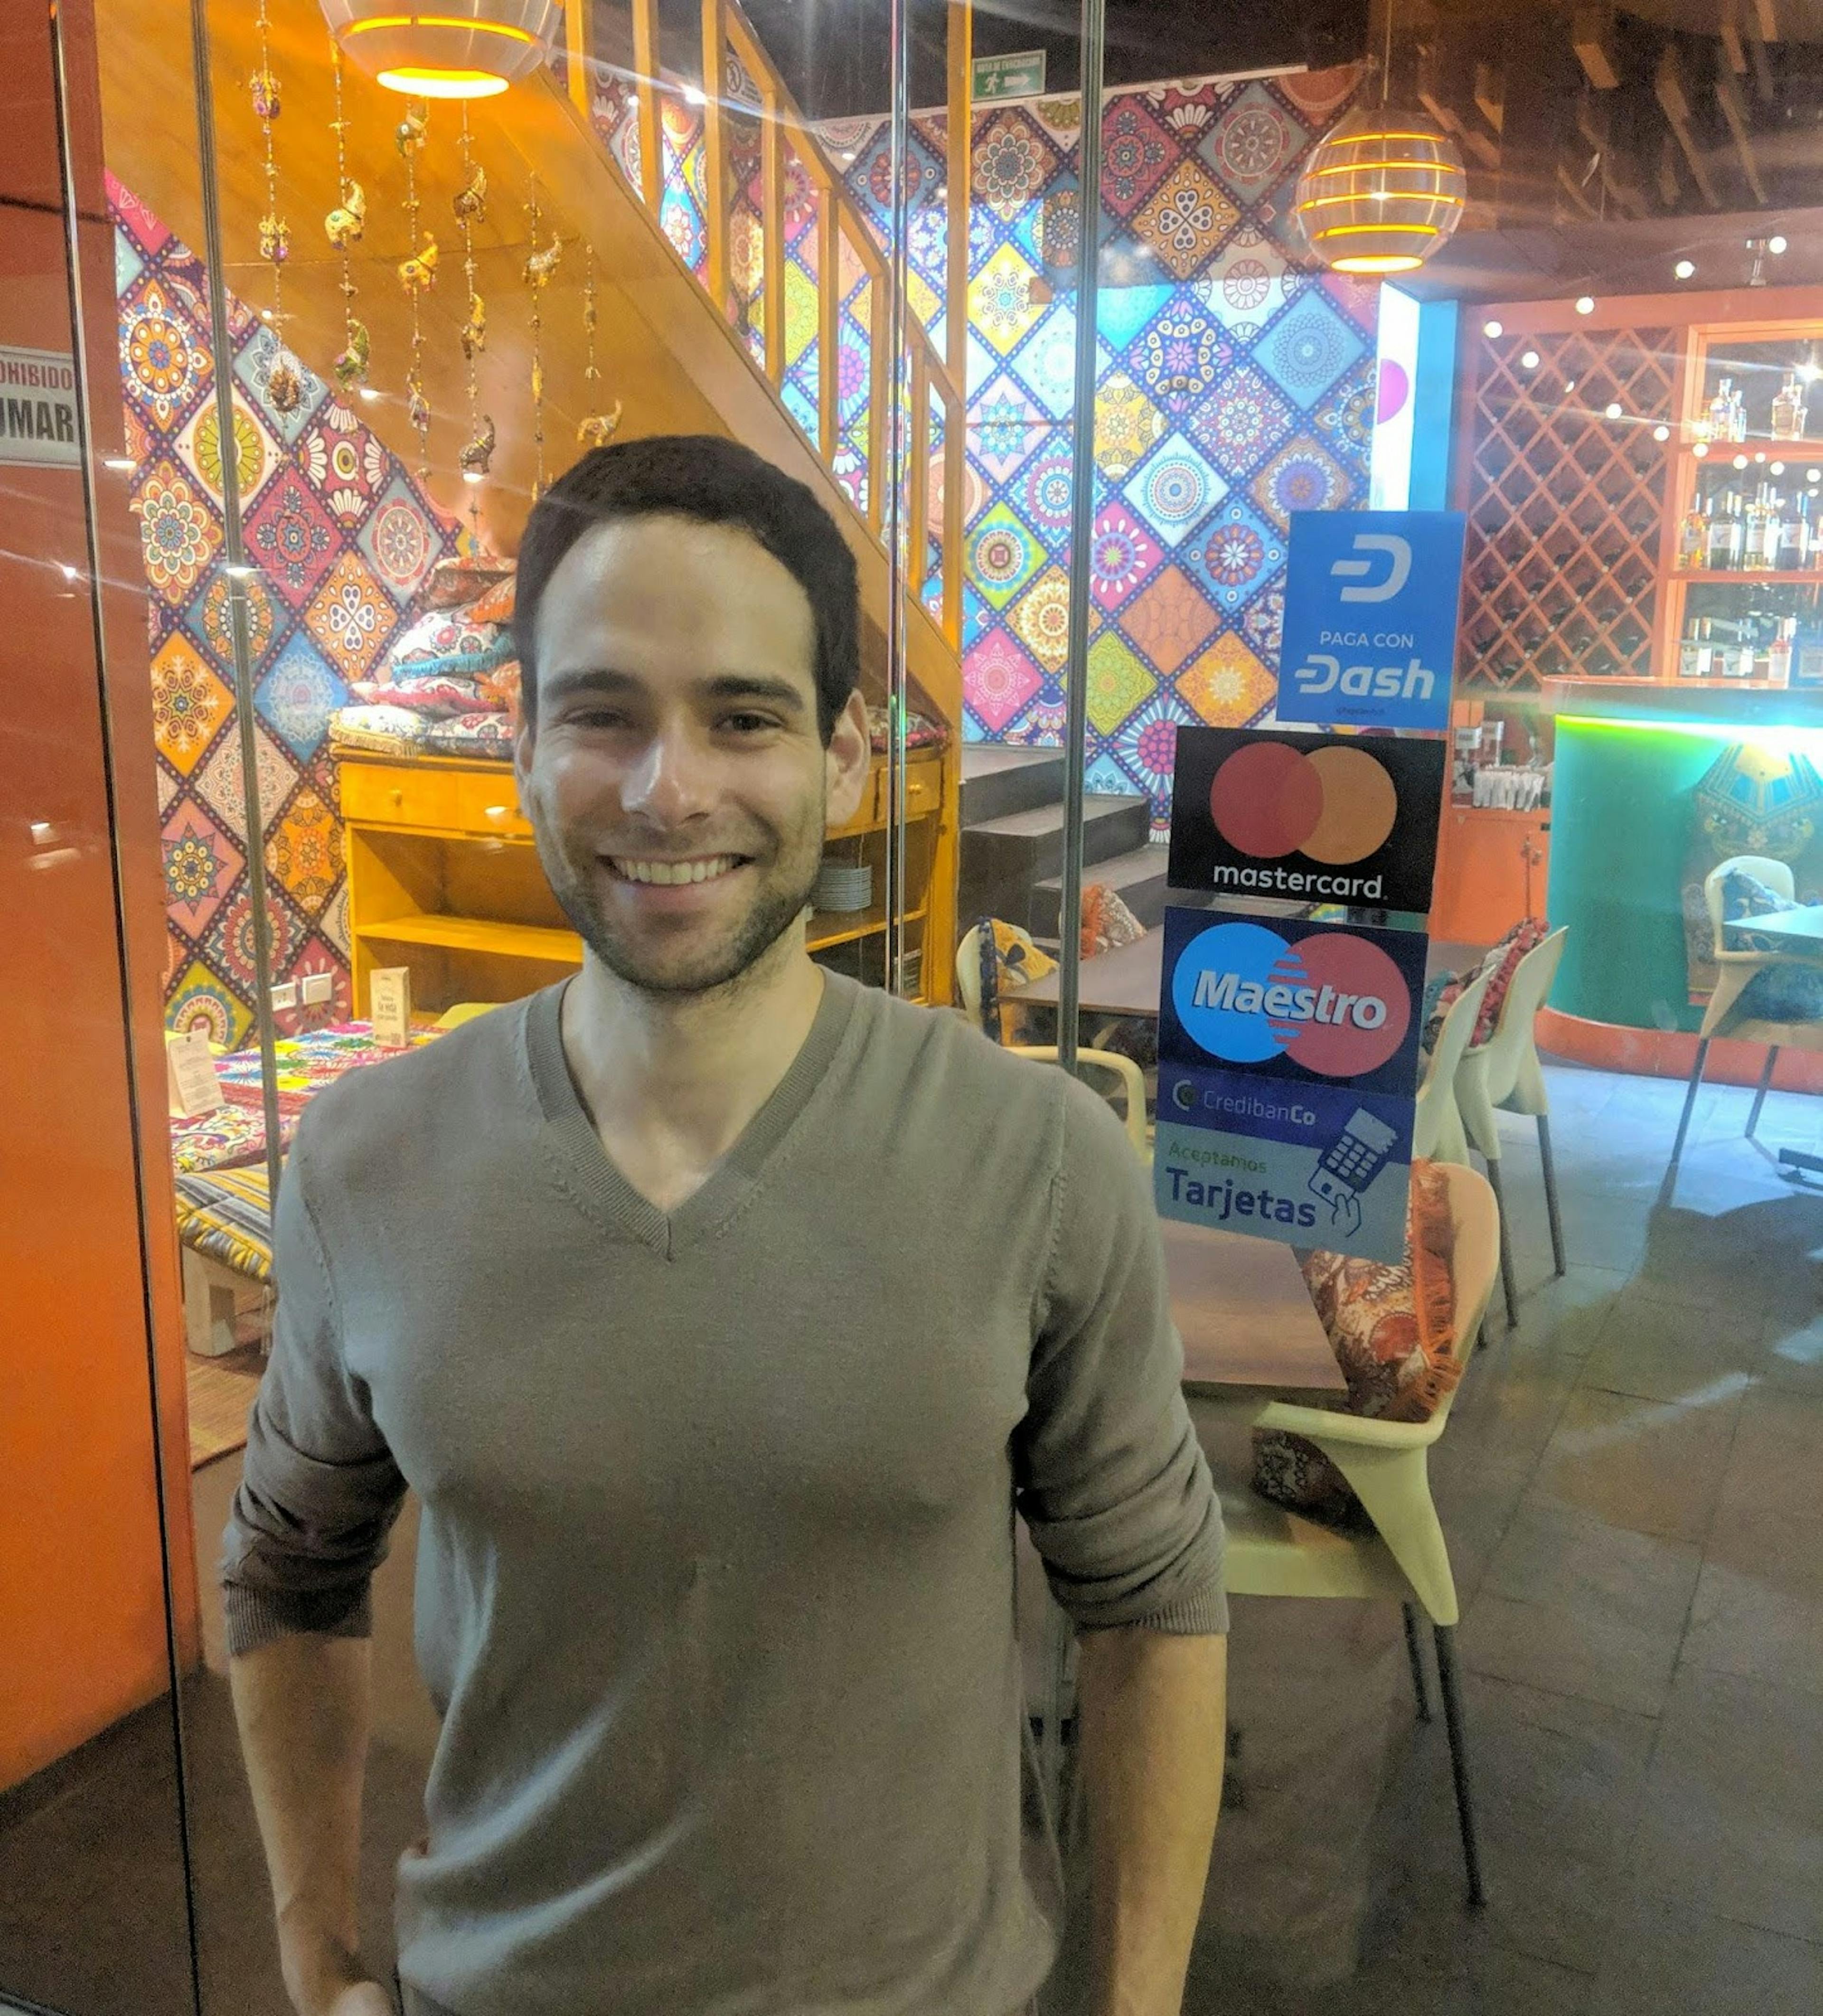 Photo credit: James, eating at my first restaurant that accepts Dash cryptocurrency